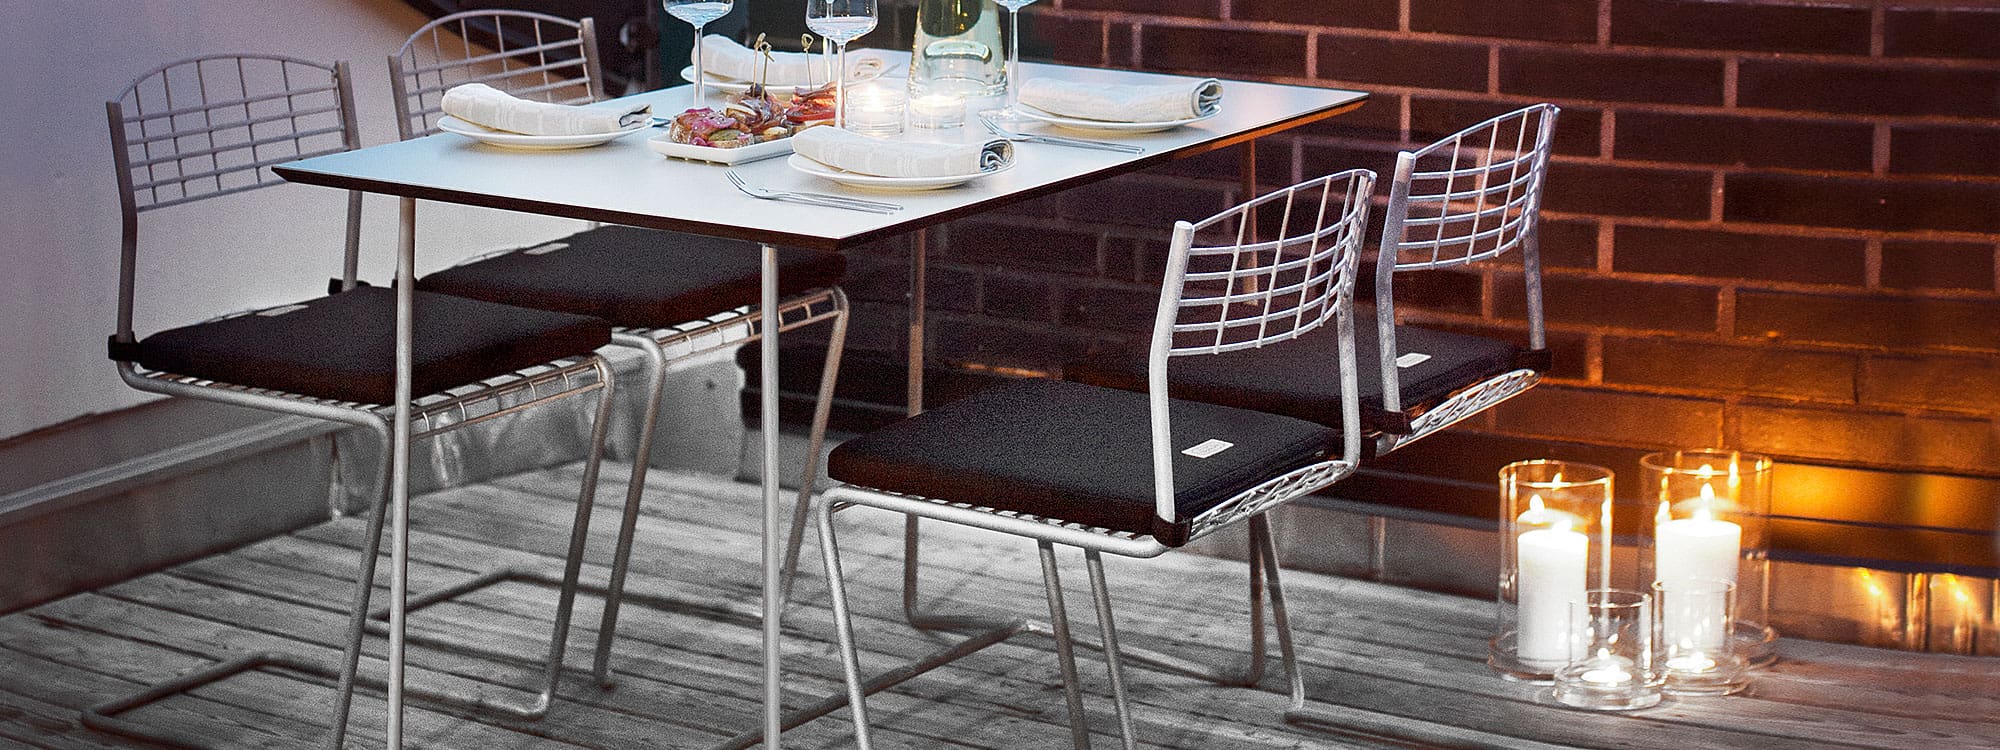 Image of Grythyttan High Tech galvanised garden chair and knock-down table with white Compact laminate table top